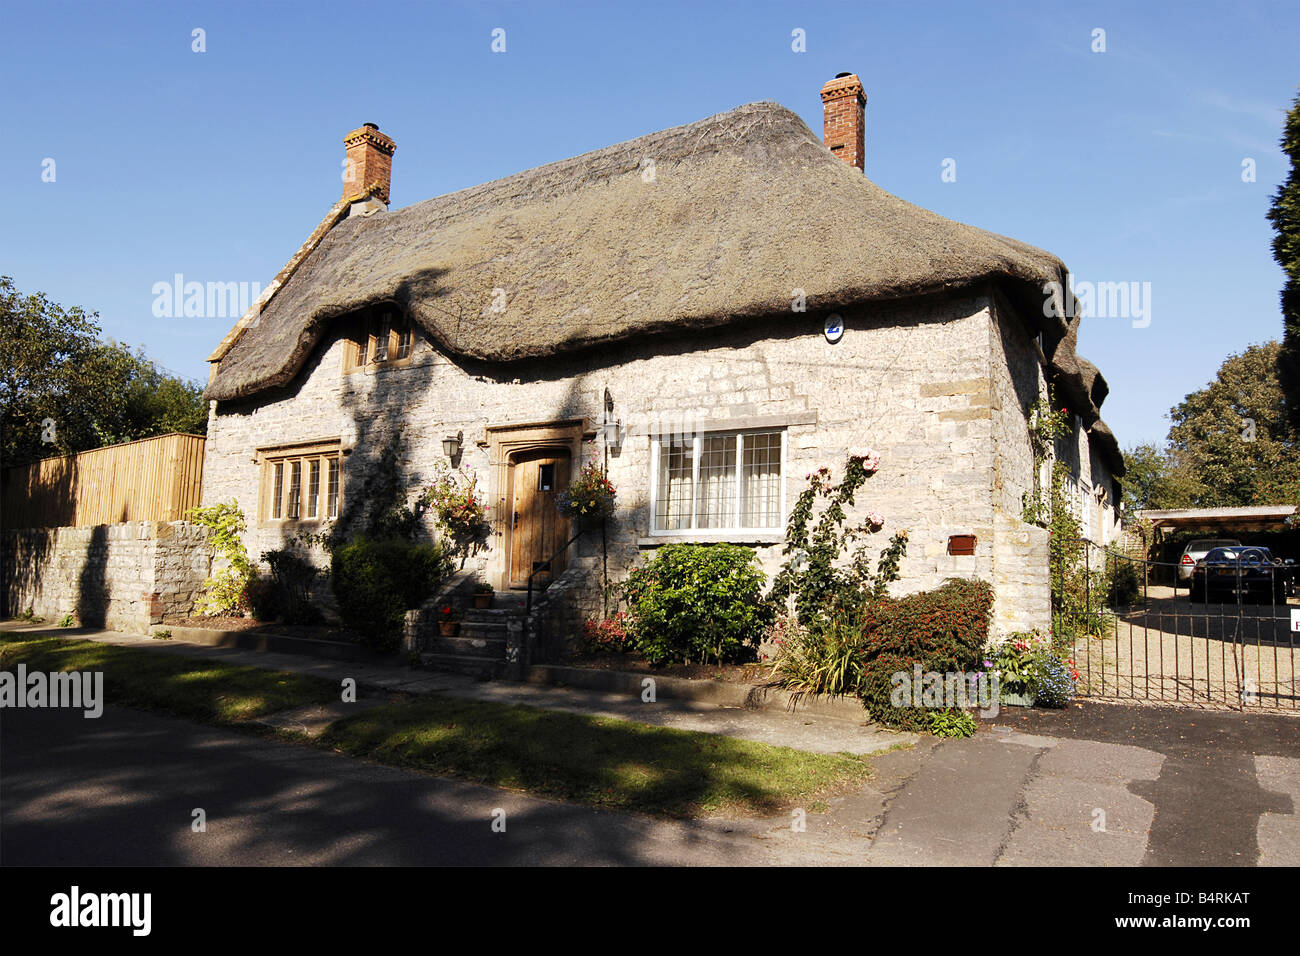 Thatched roof cottage in the small village of Marston Magna in Somerset England Stock Photo